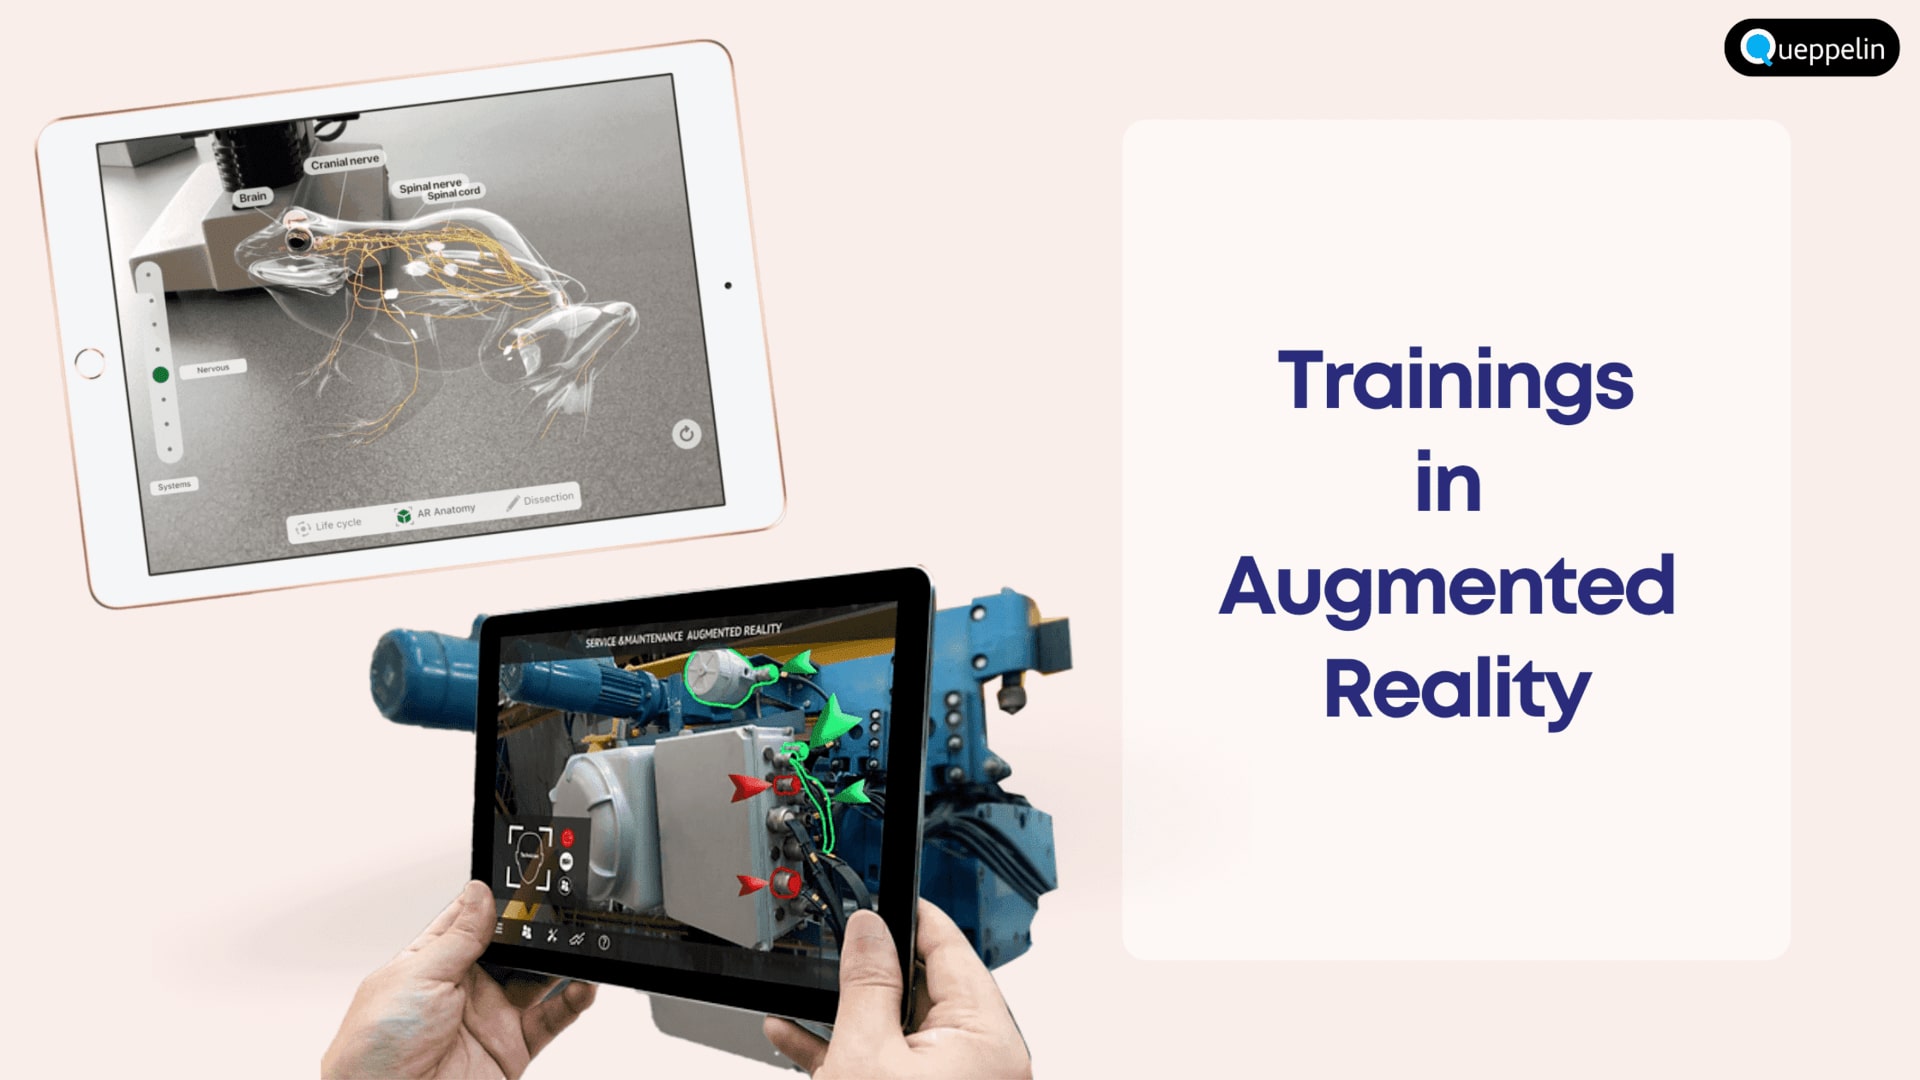 Augmented Reality in Training: Usage, Benefits & Limitations